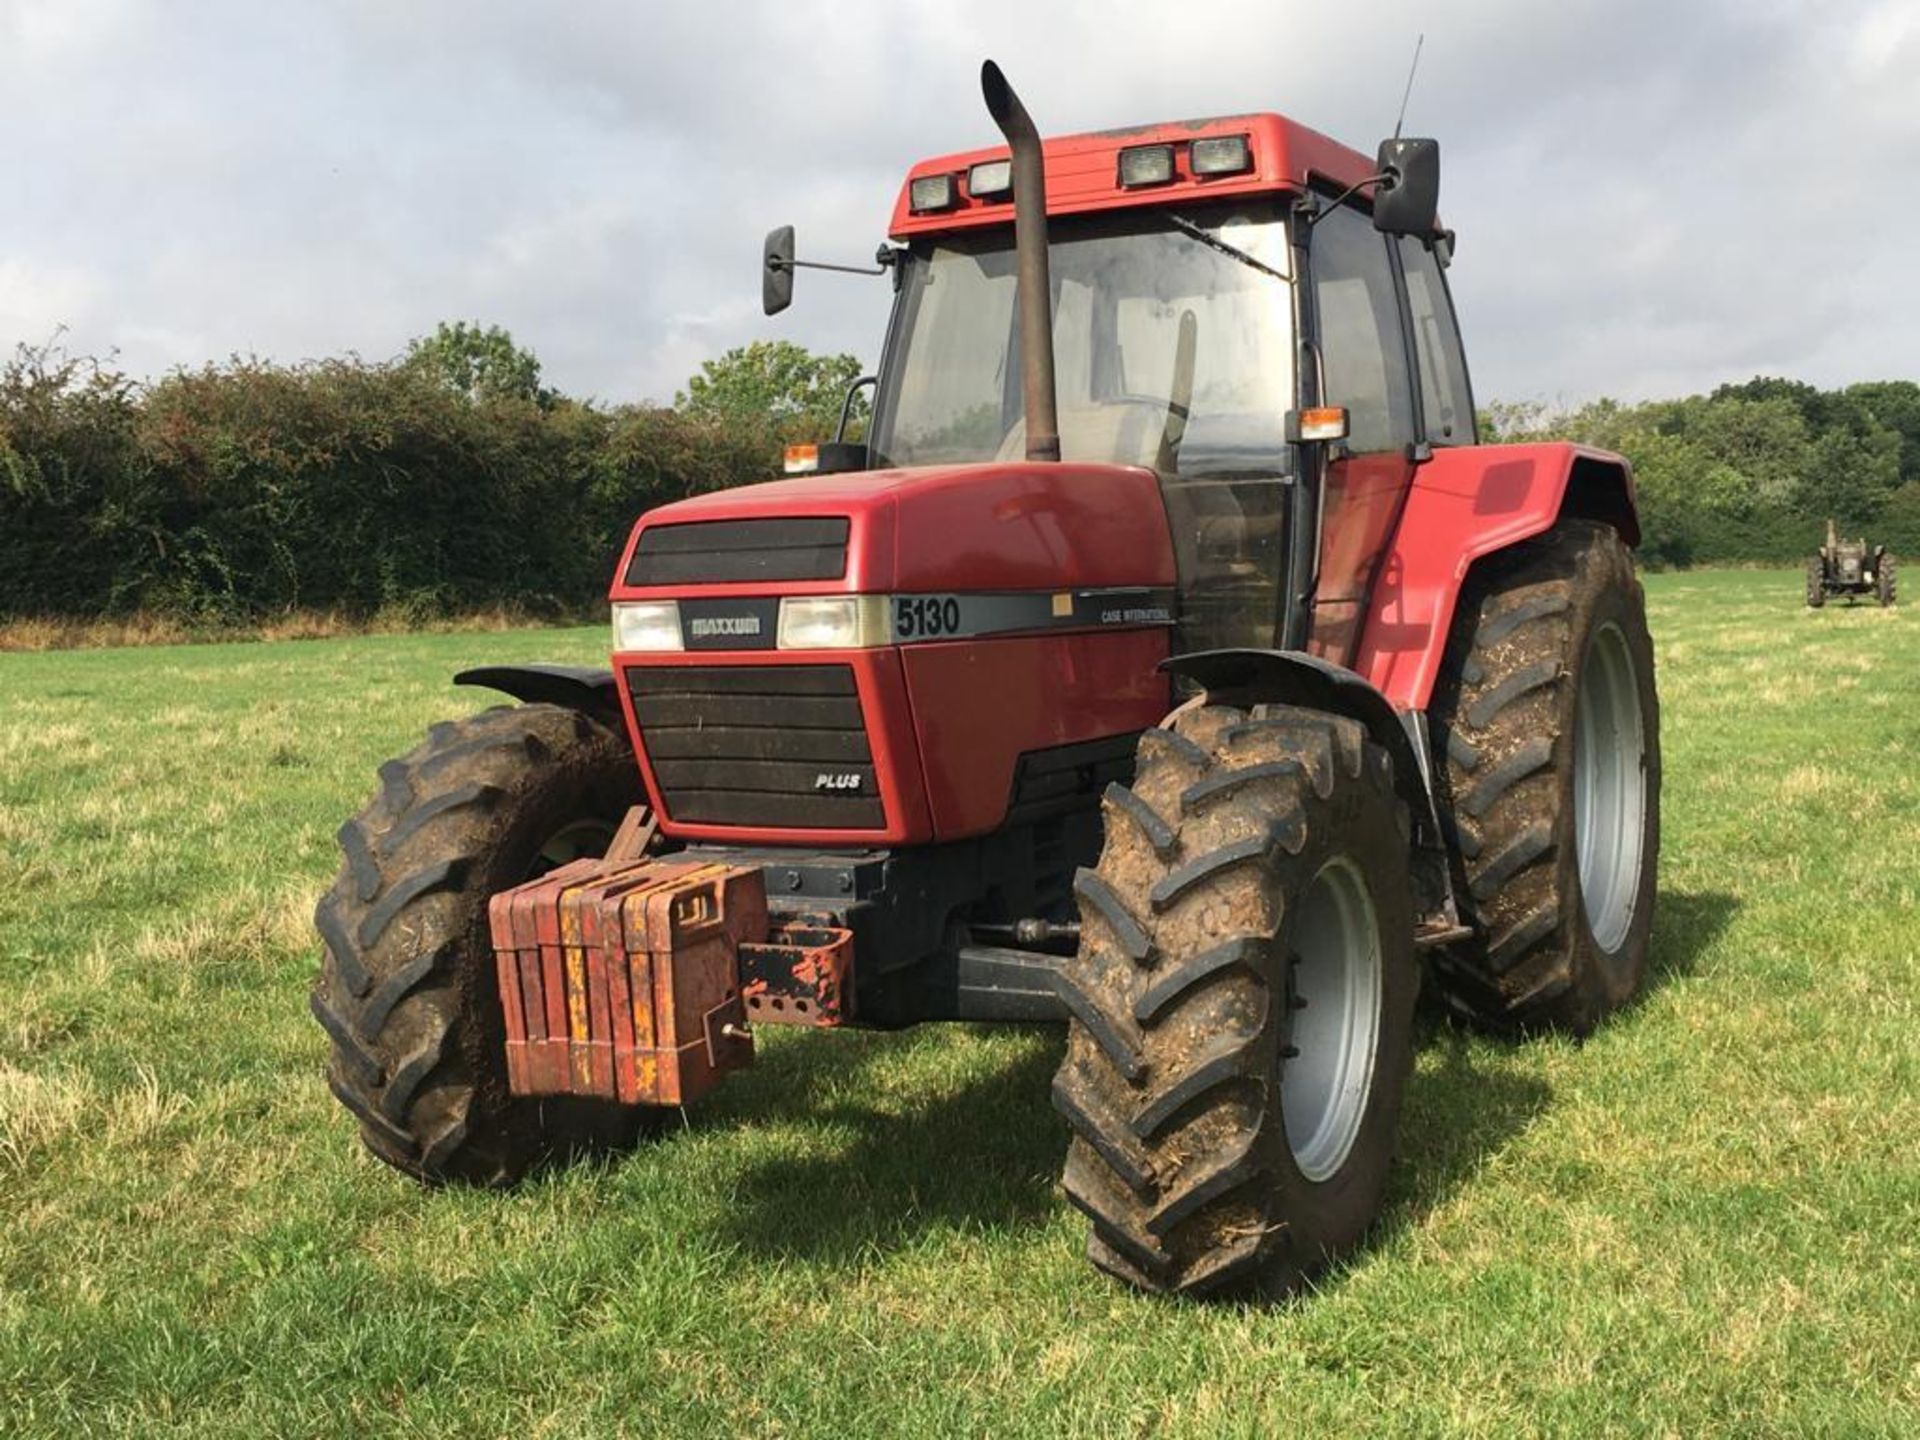 1995 Case International 5130 Maxxum Plus 4wd tractor with 2 manual spools and front wafer weights on - Image 9 of 16